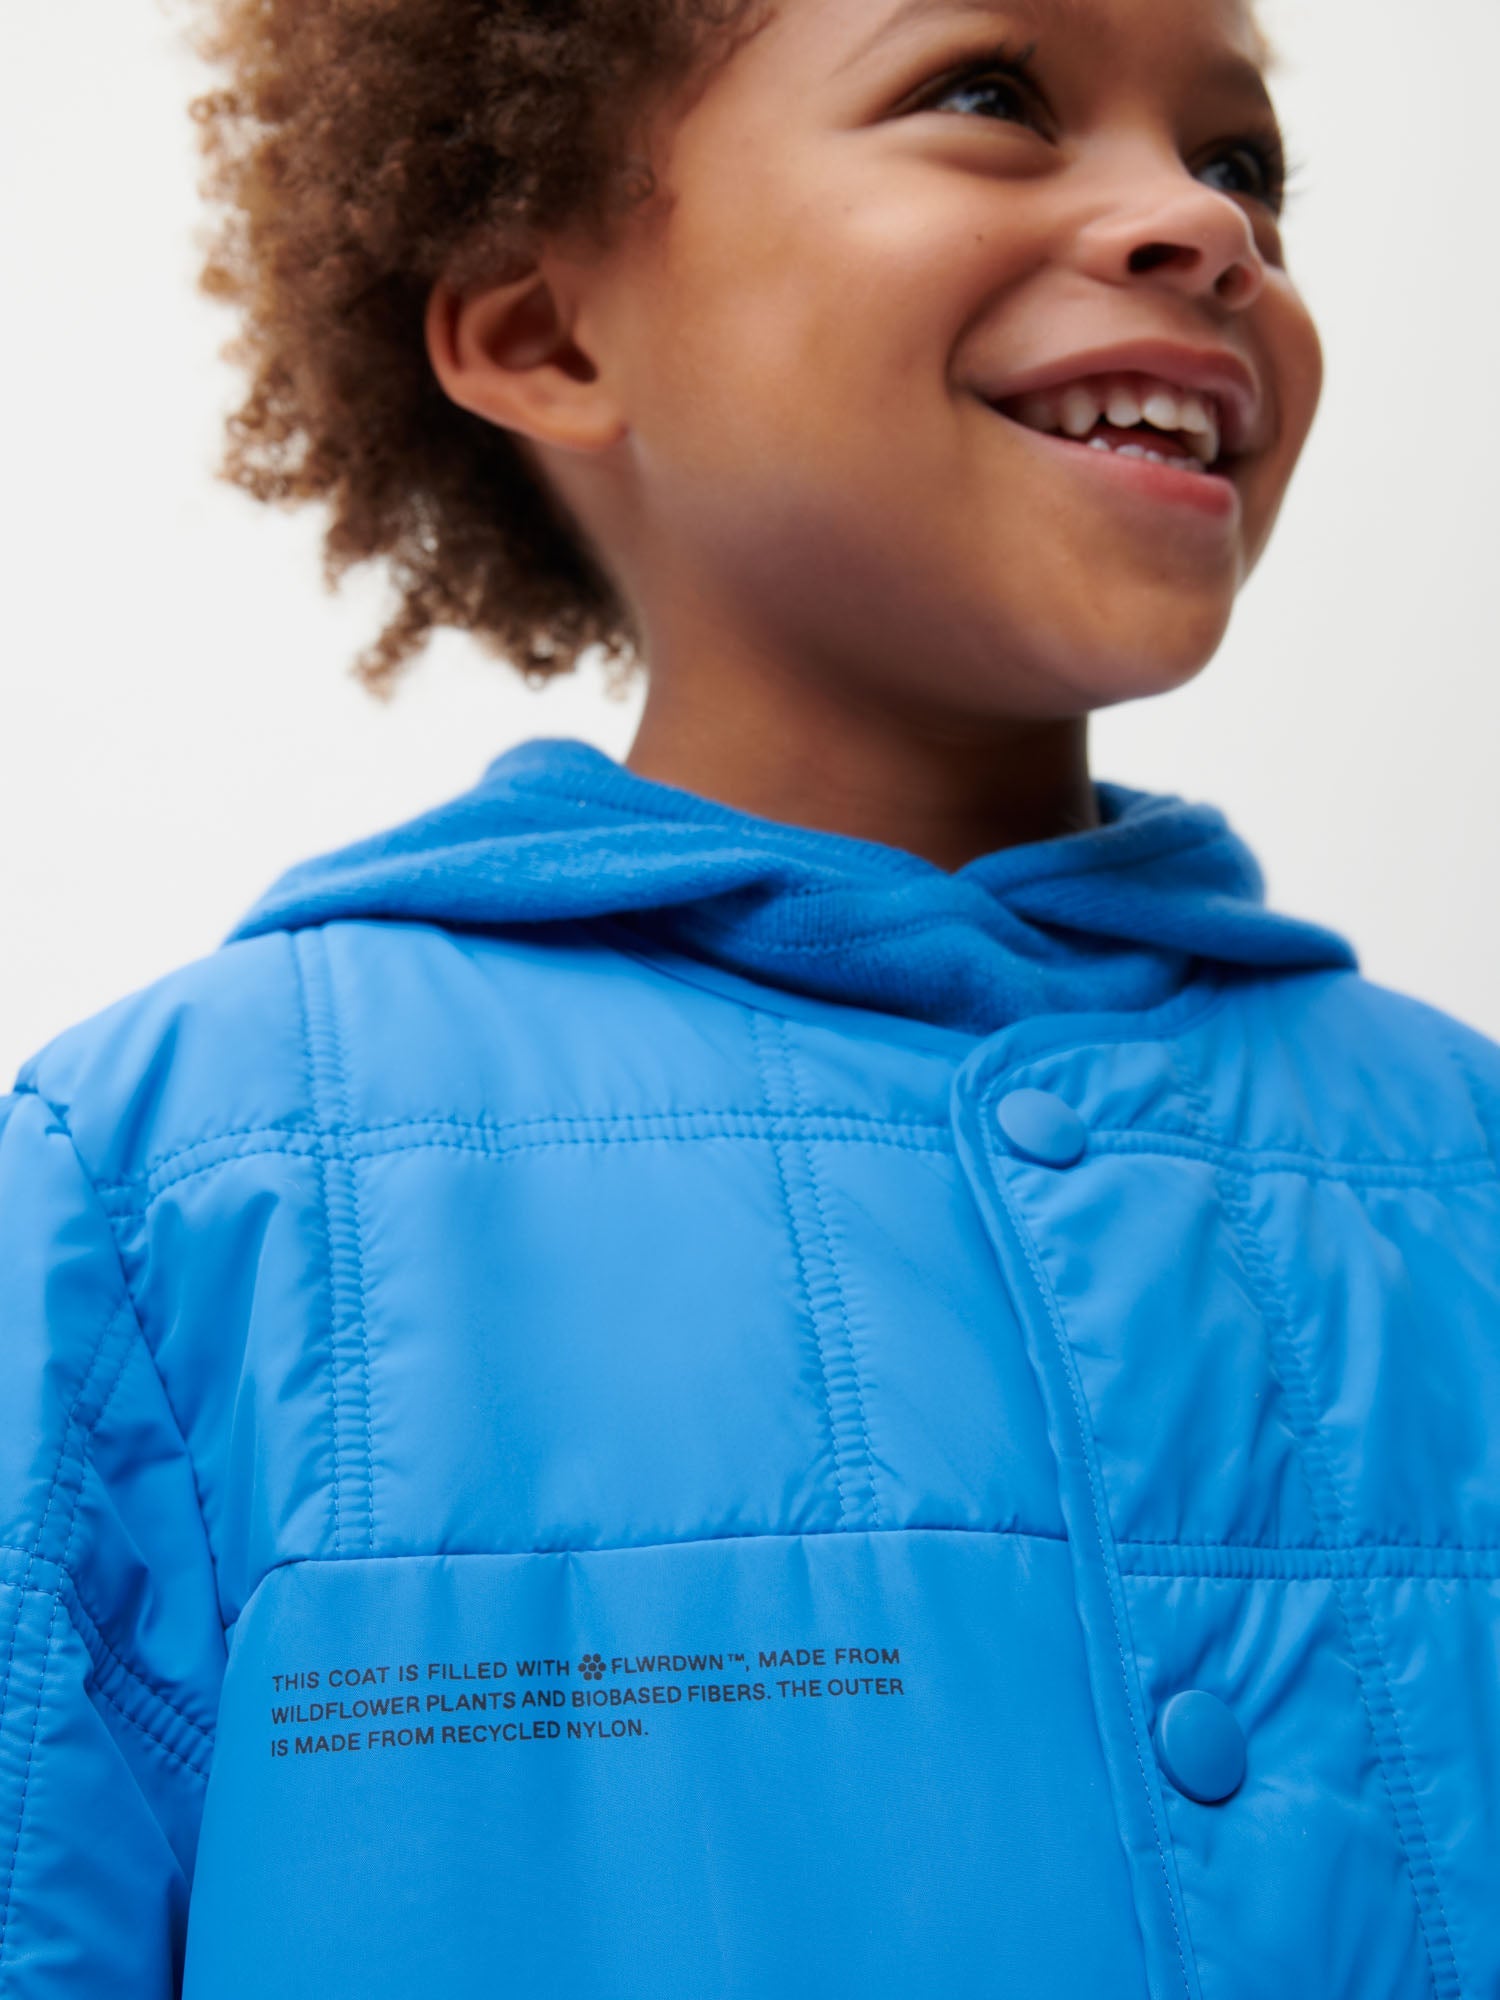 Kids-Recycled-Nylon-NW-FLWRDWN-Quilted-Collarless-Jacket-Cerulean-Blue-3